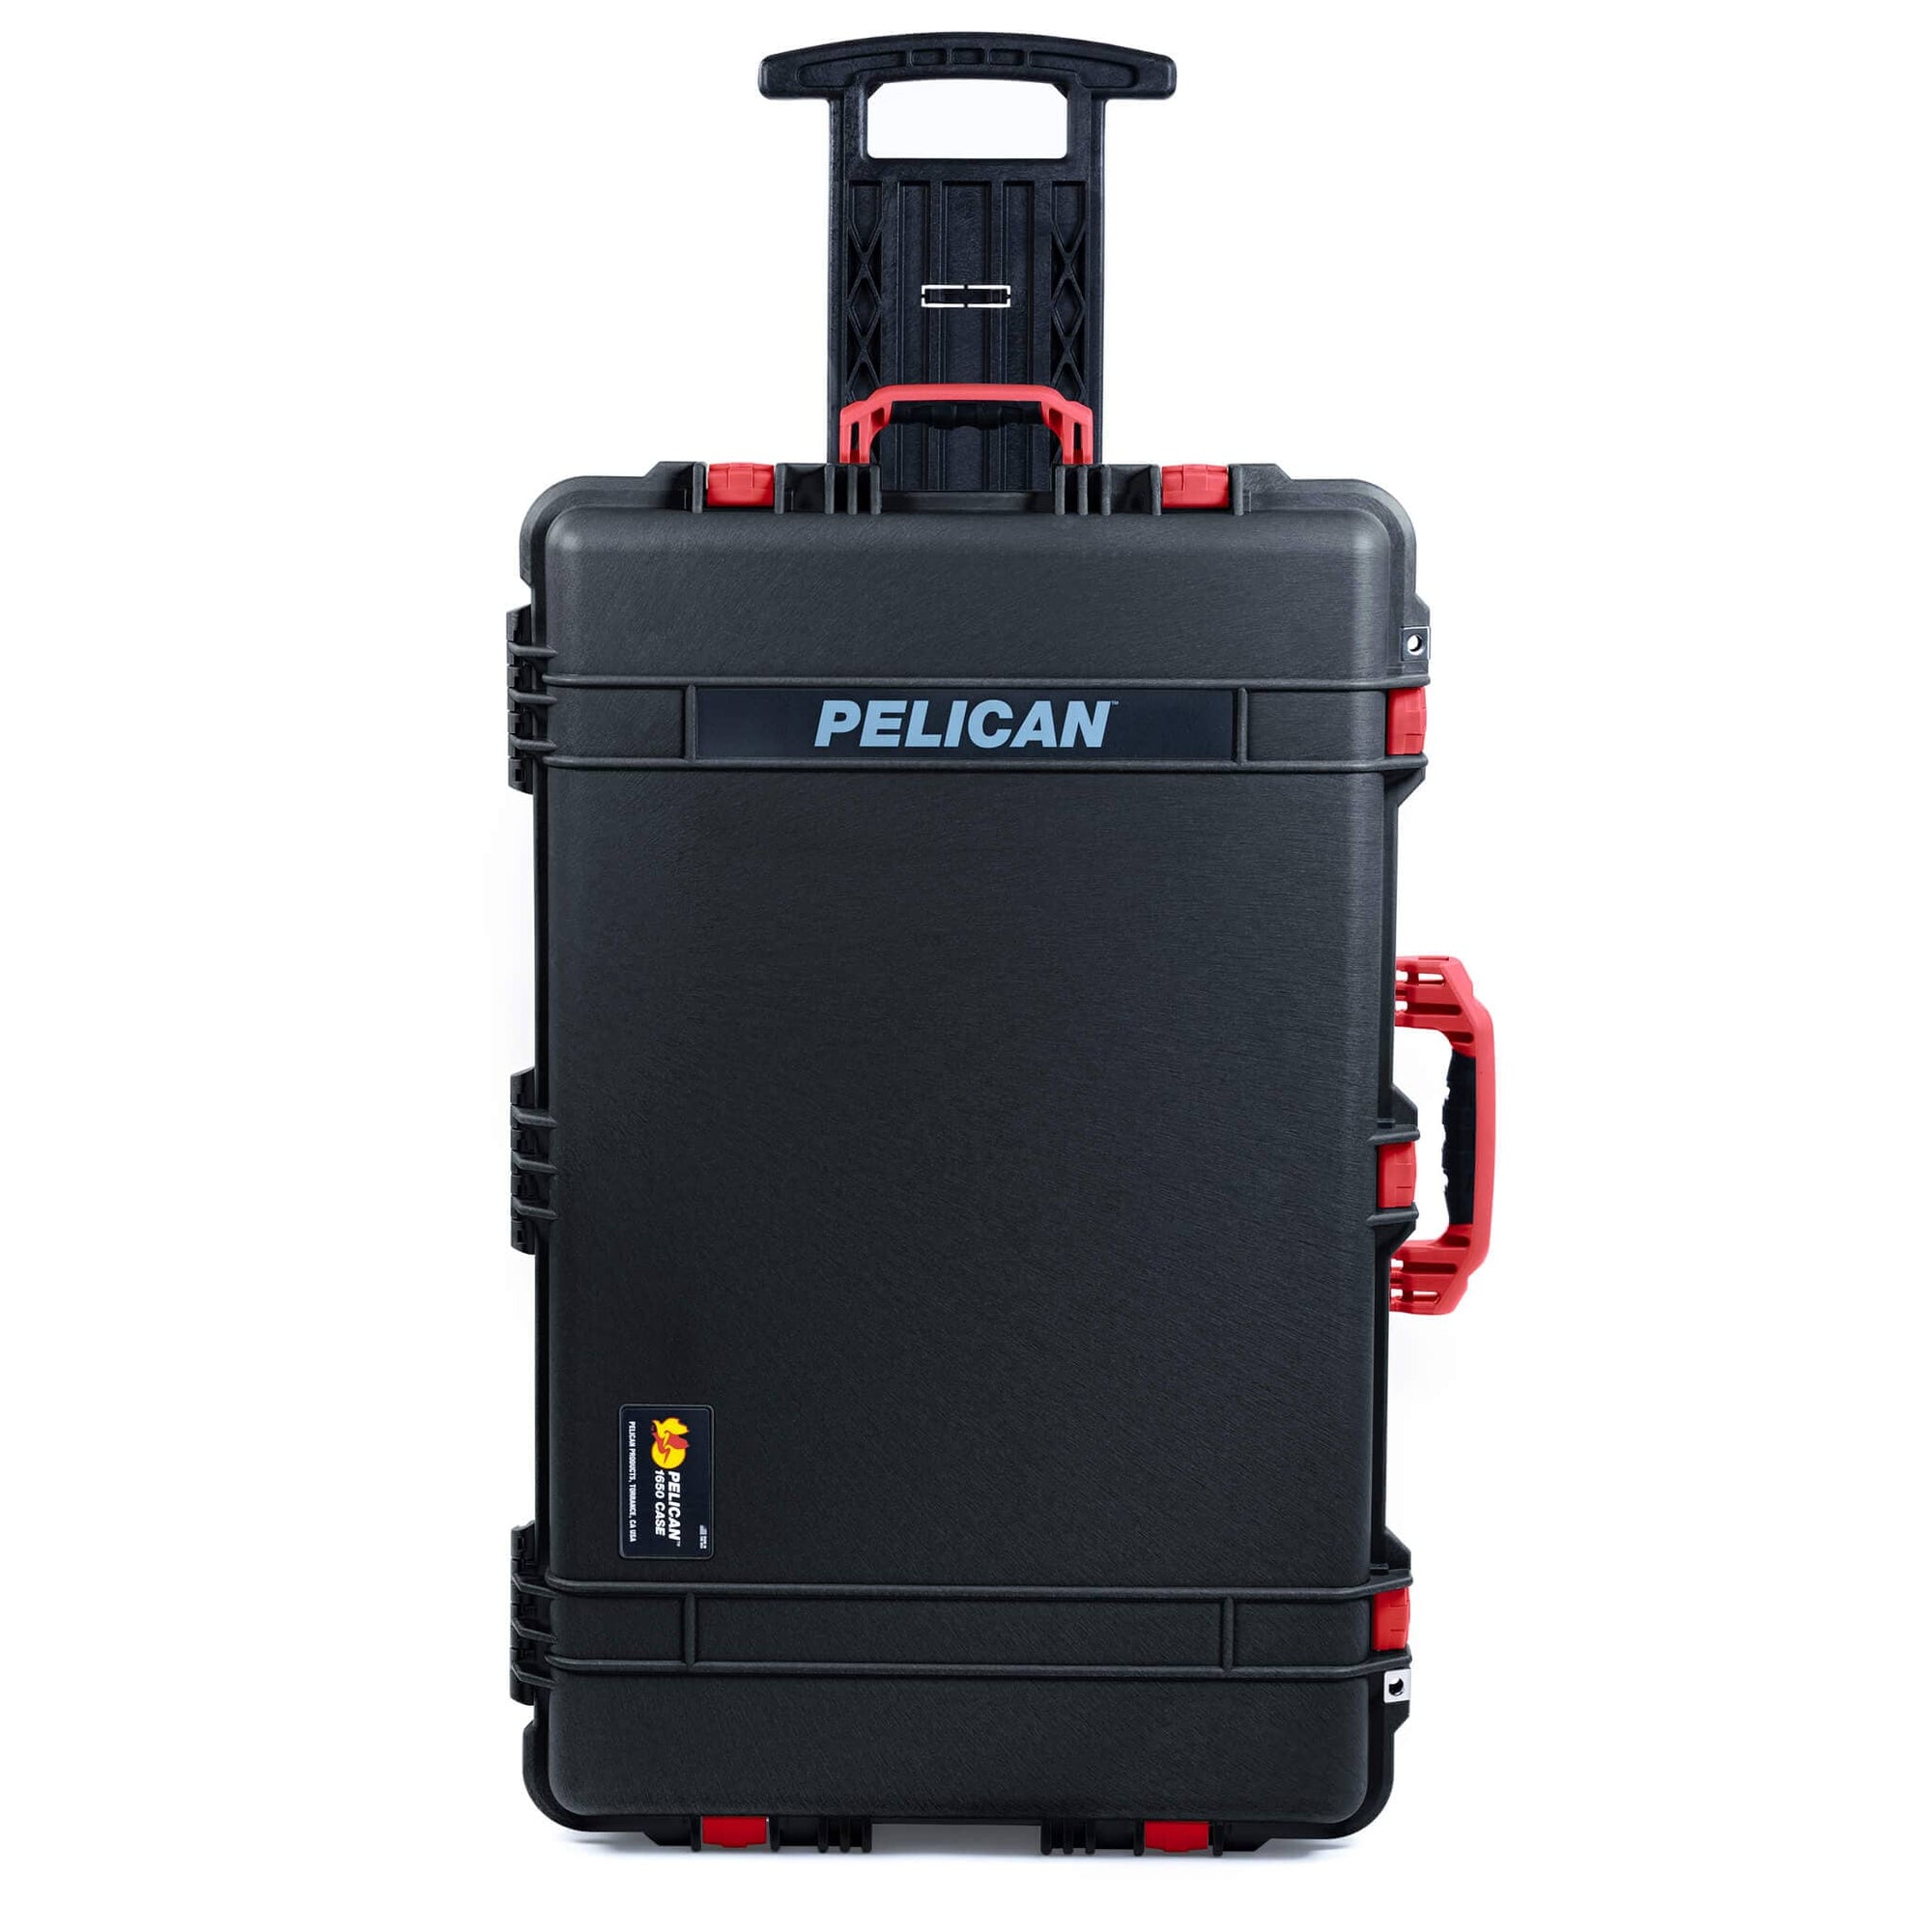 Pelican 1650 Case, Black with Red Handles & Latches